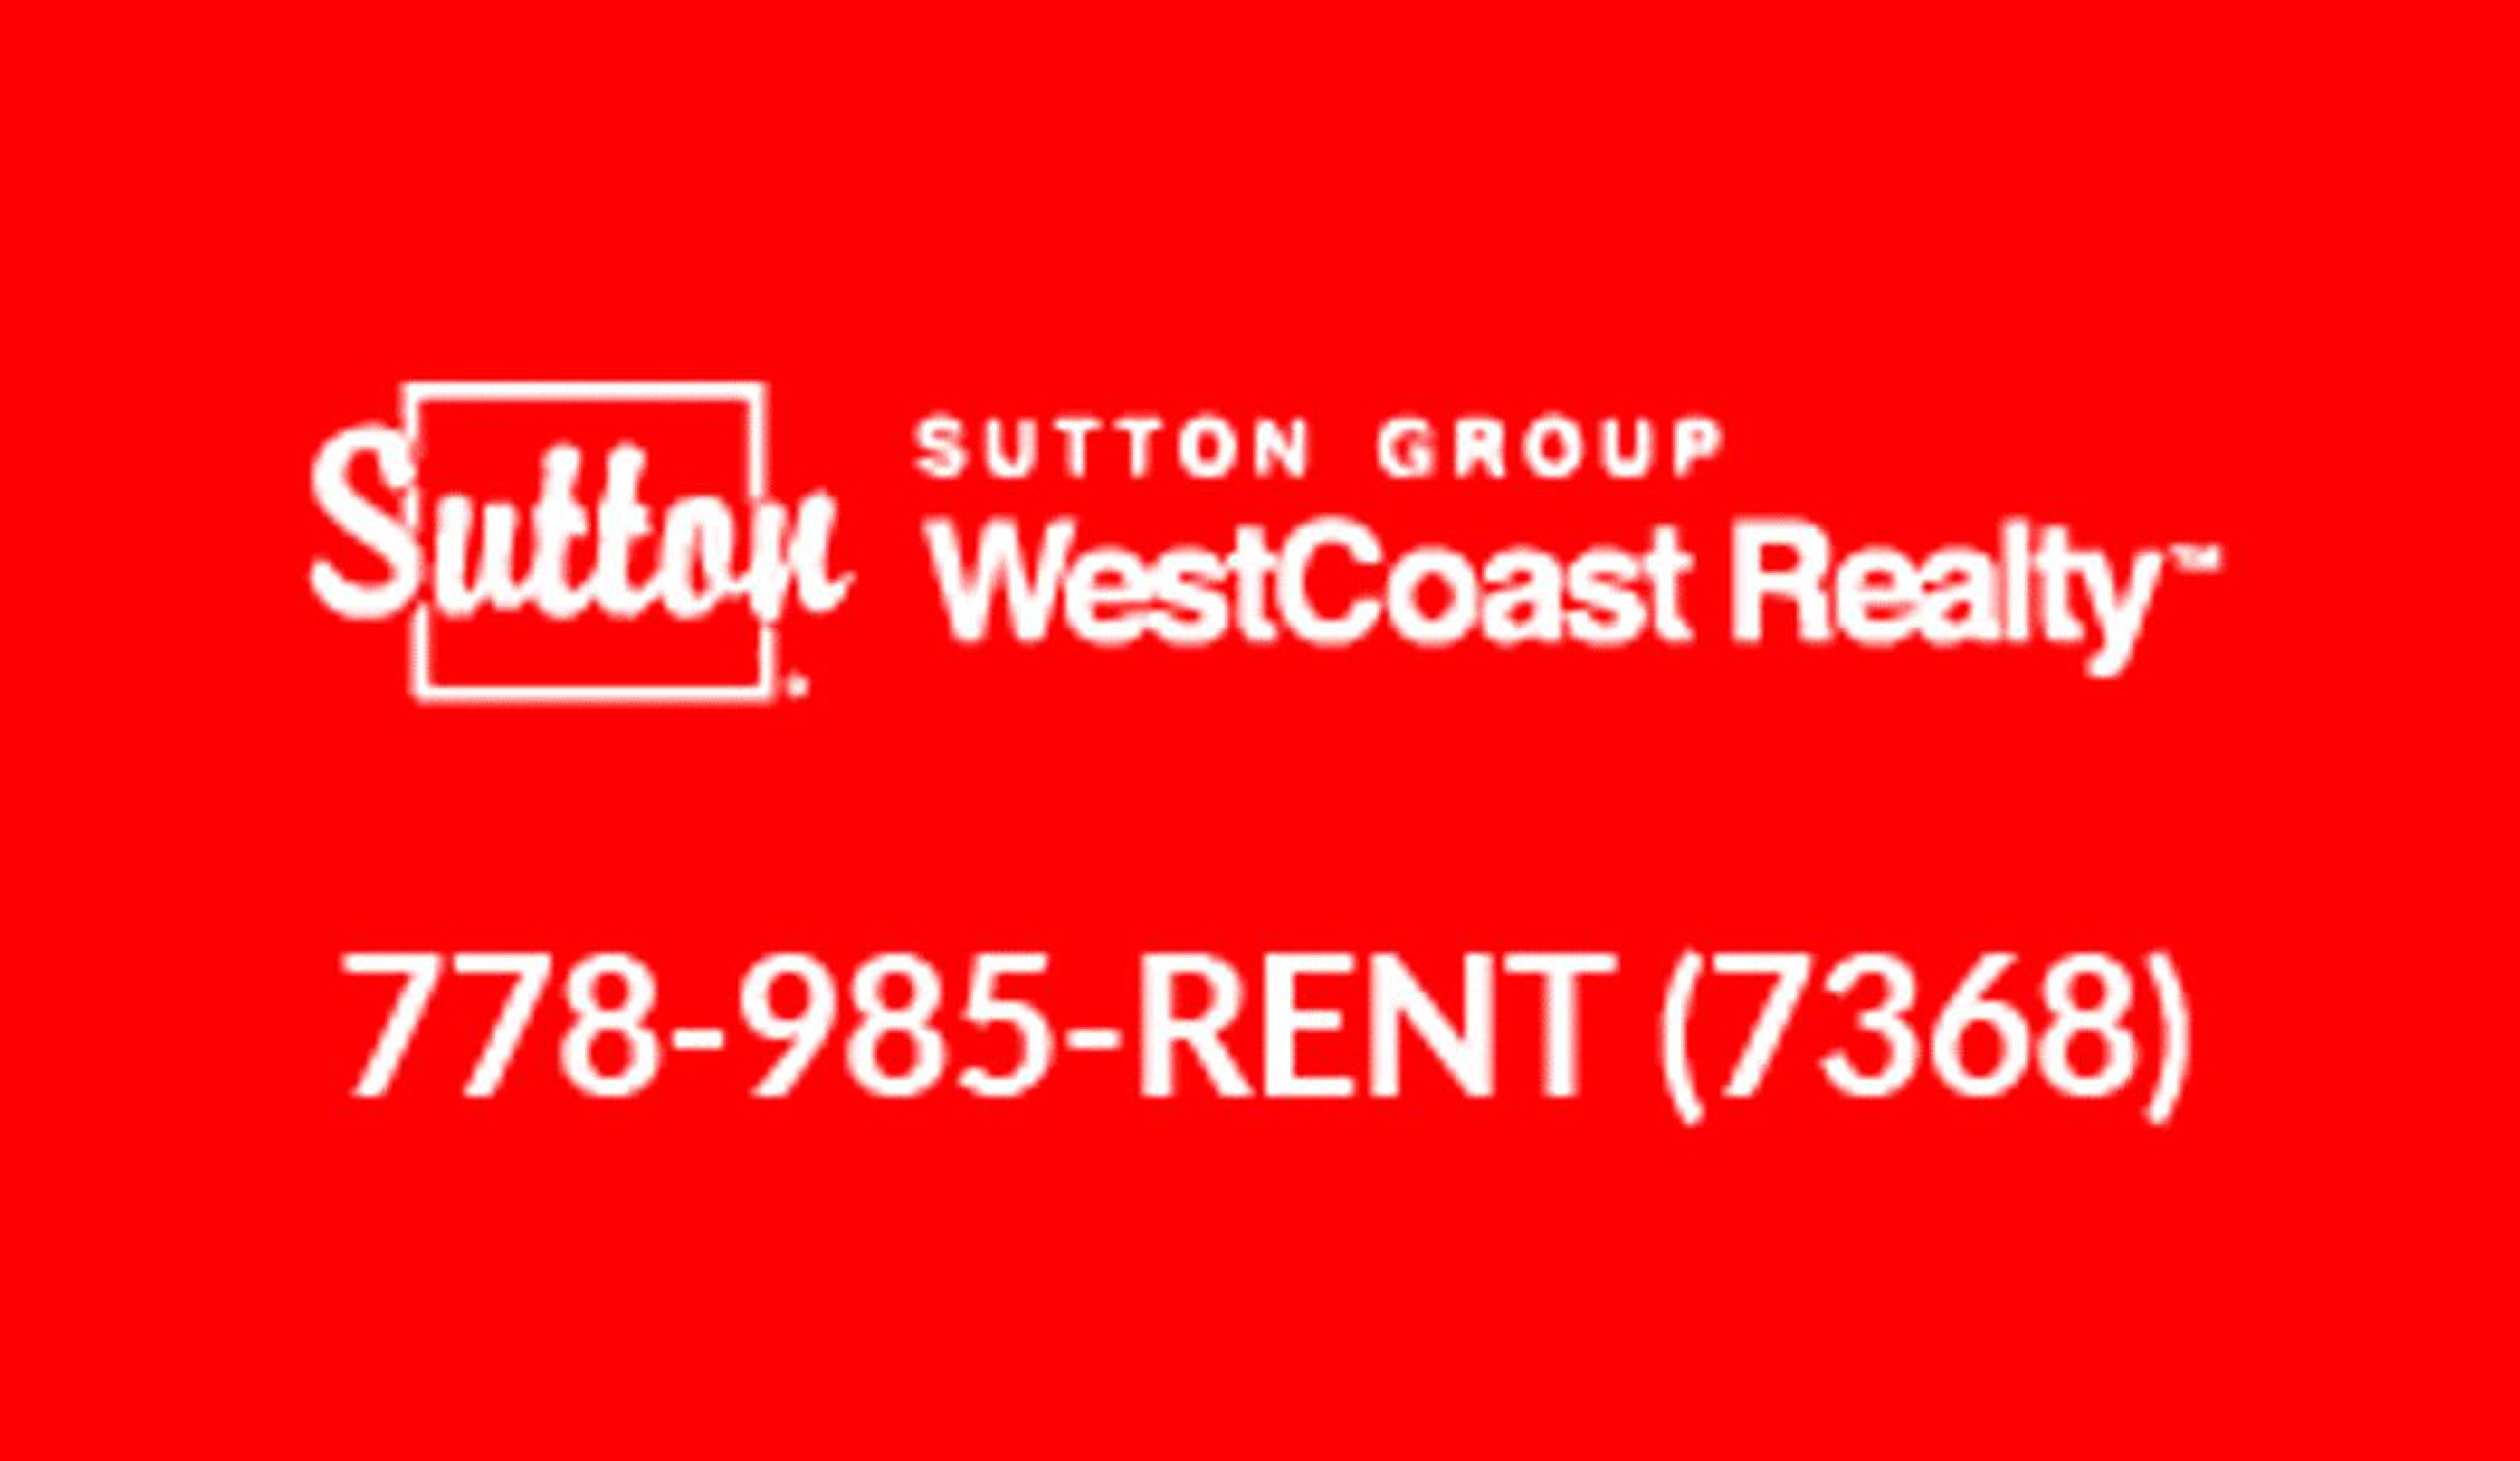 Sutton Group West Coast Realty Logo